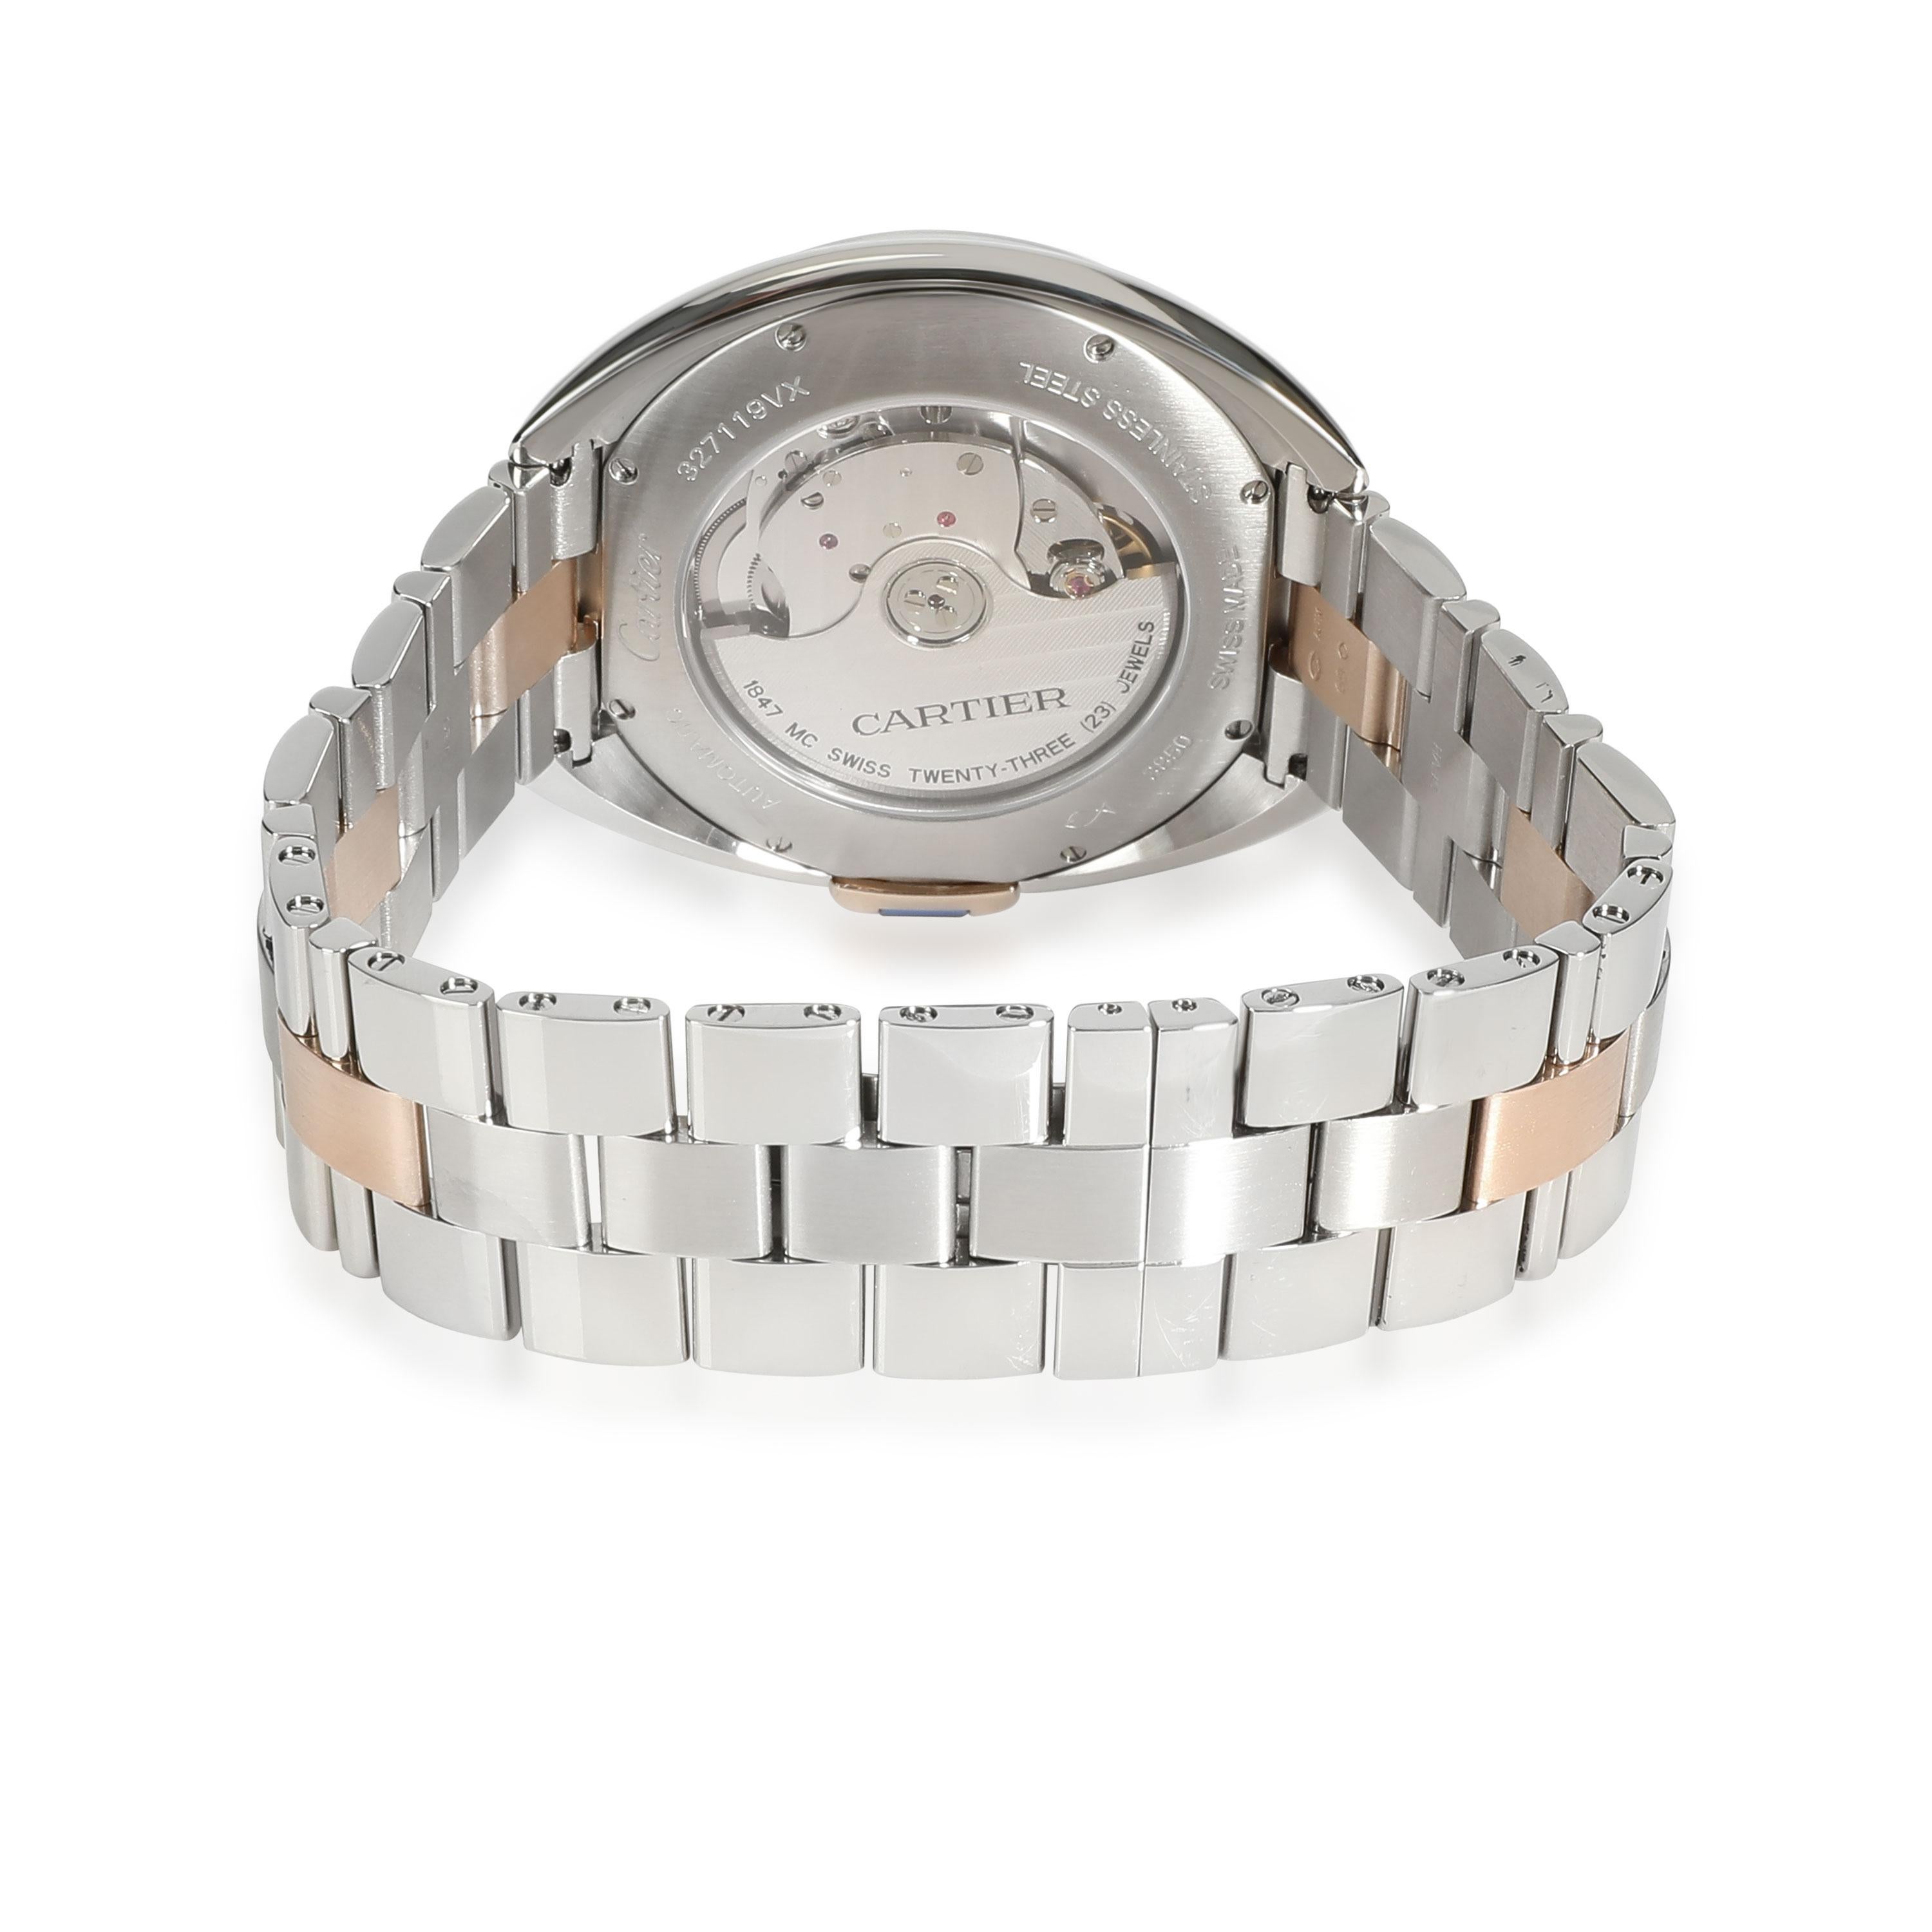 Cartier Cle de Cartier W2CL0002 Men's Watch in 18kt Stainless Steel/Rose Gold

SKU: 108450

PRIMARY DETAILS
Brand:  Cartier
Model: Cle de Cartier
Country of Origin: Switzerland
Movement Type: Mechanical: Automatic/Kinetic
Year Manufactured: